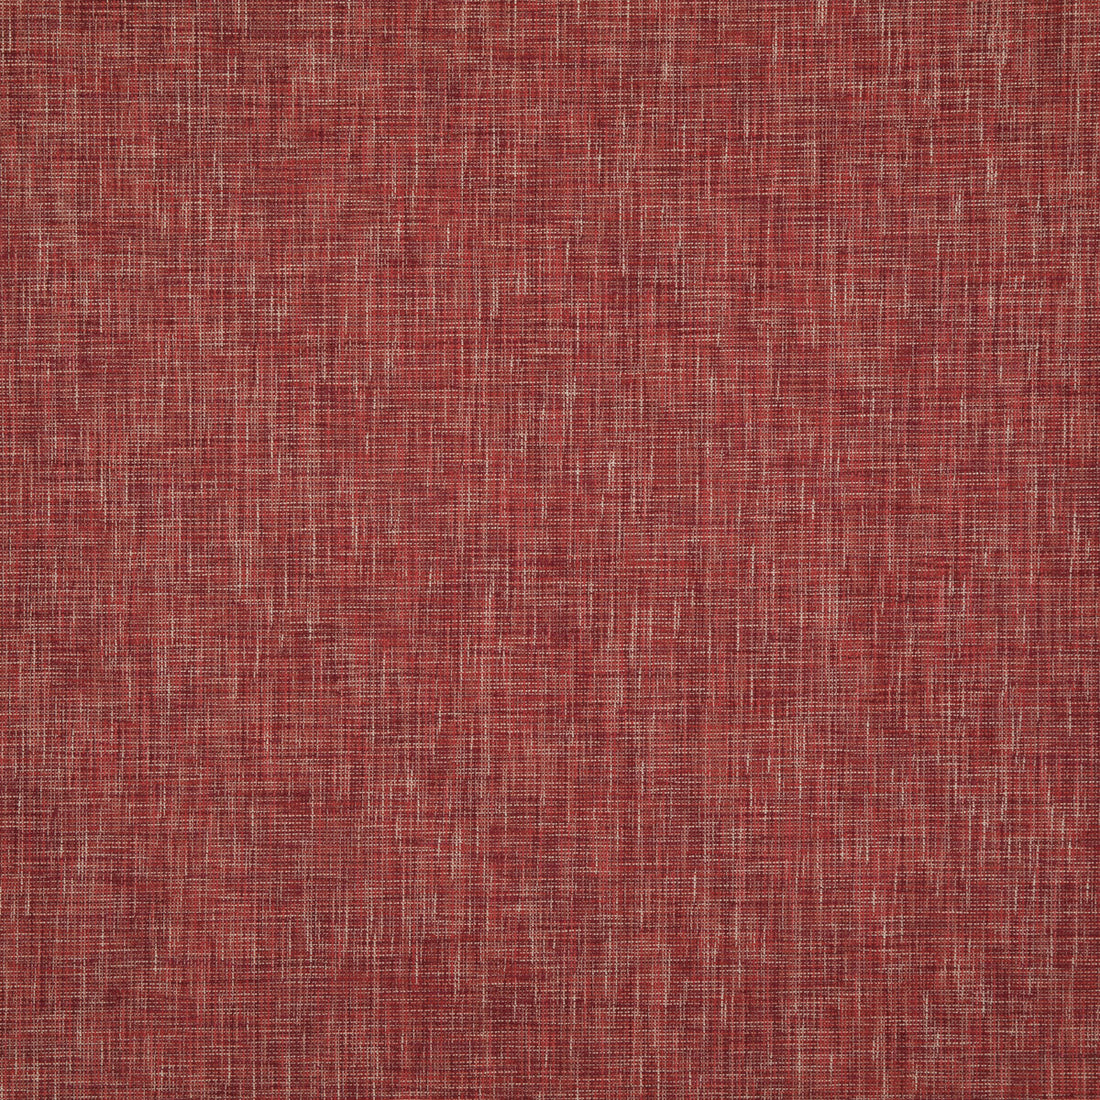 Temae Texture fabric in red color - pattern 8018107.19.0 - by Brunschwig &amp; Fils in the Baret collection